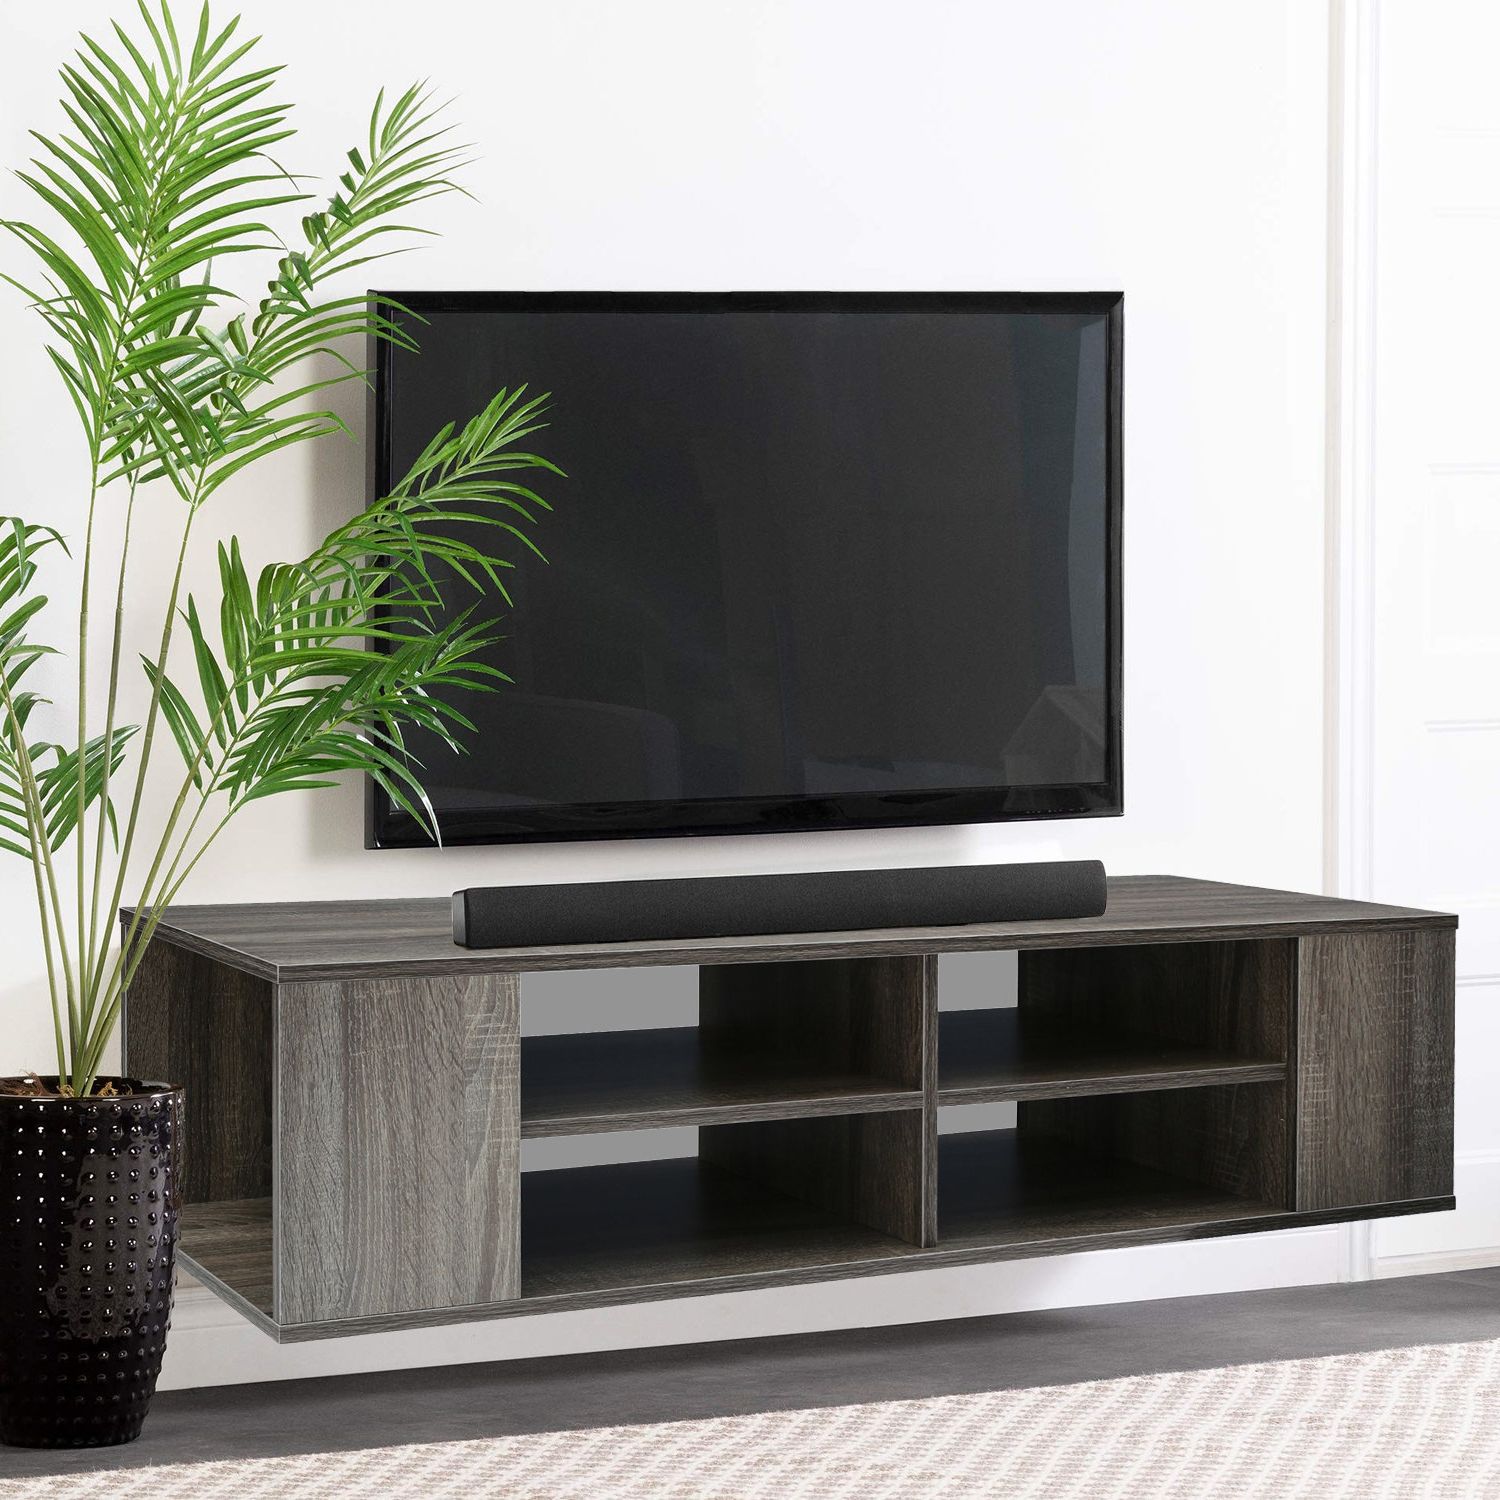 Ebern Designs Lequentin Wood Wall Mounted Media Console, Floating Tv Stand  Component Shelf, Tv Cabinet For Tvs Up To 50" & Reviews | Wayfair Within Modern Stands With Shelves (Gallery 12 of 20)